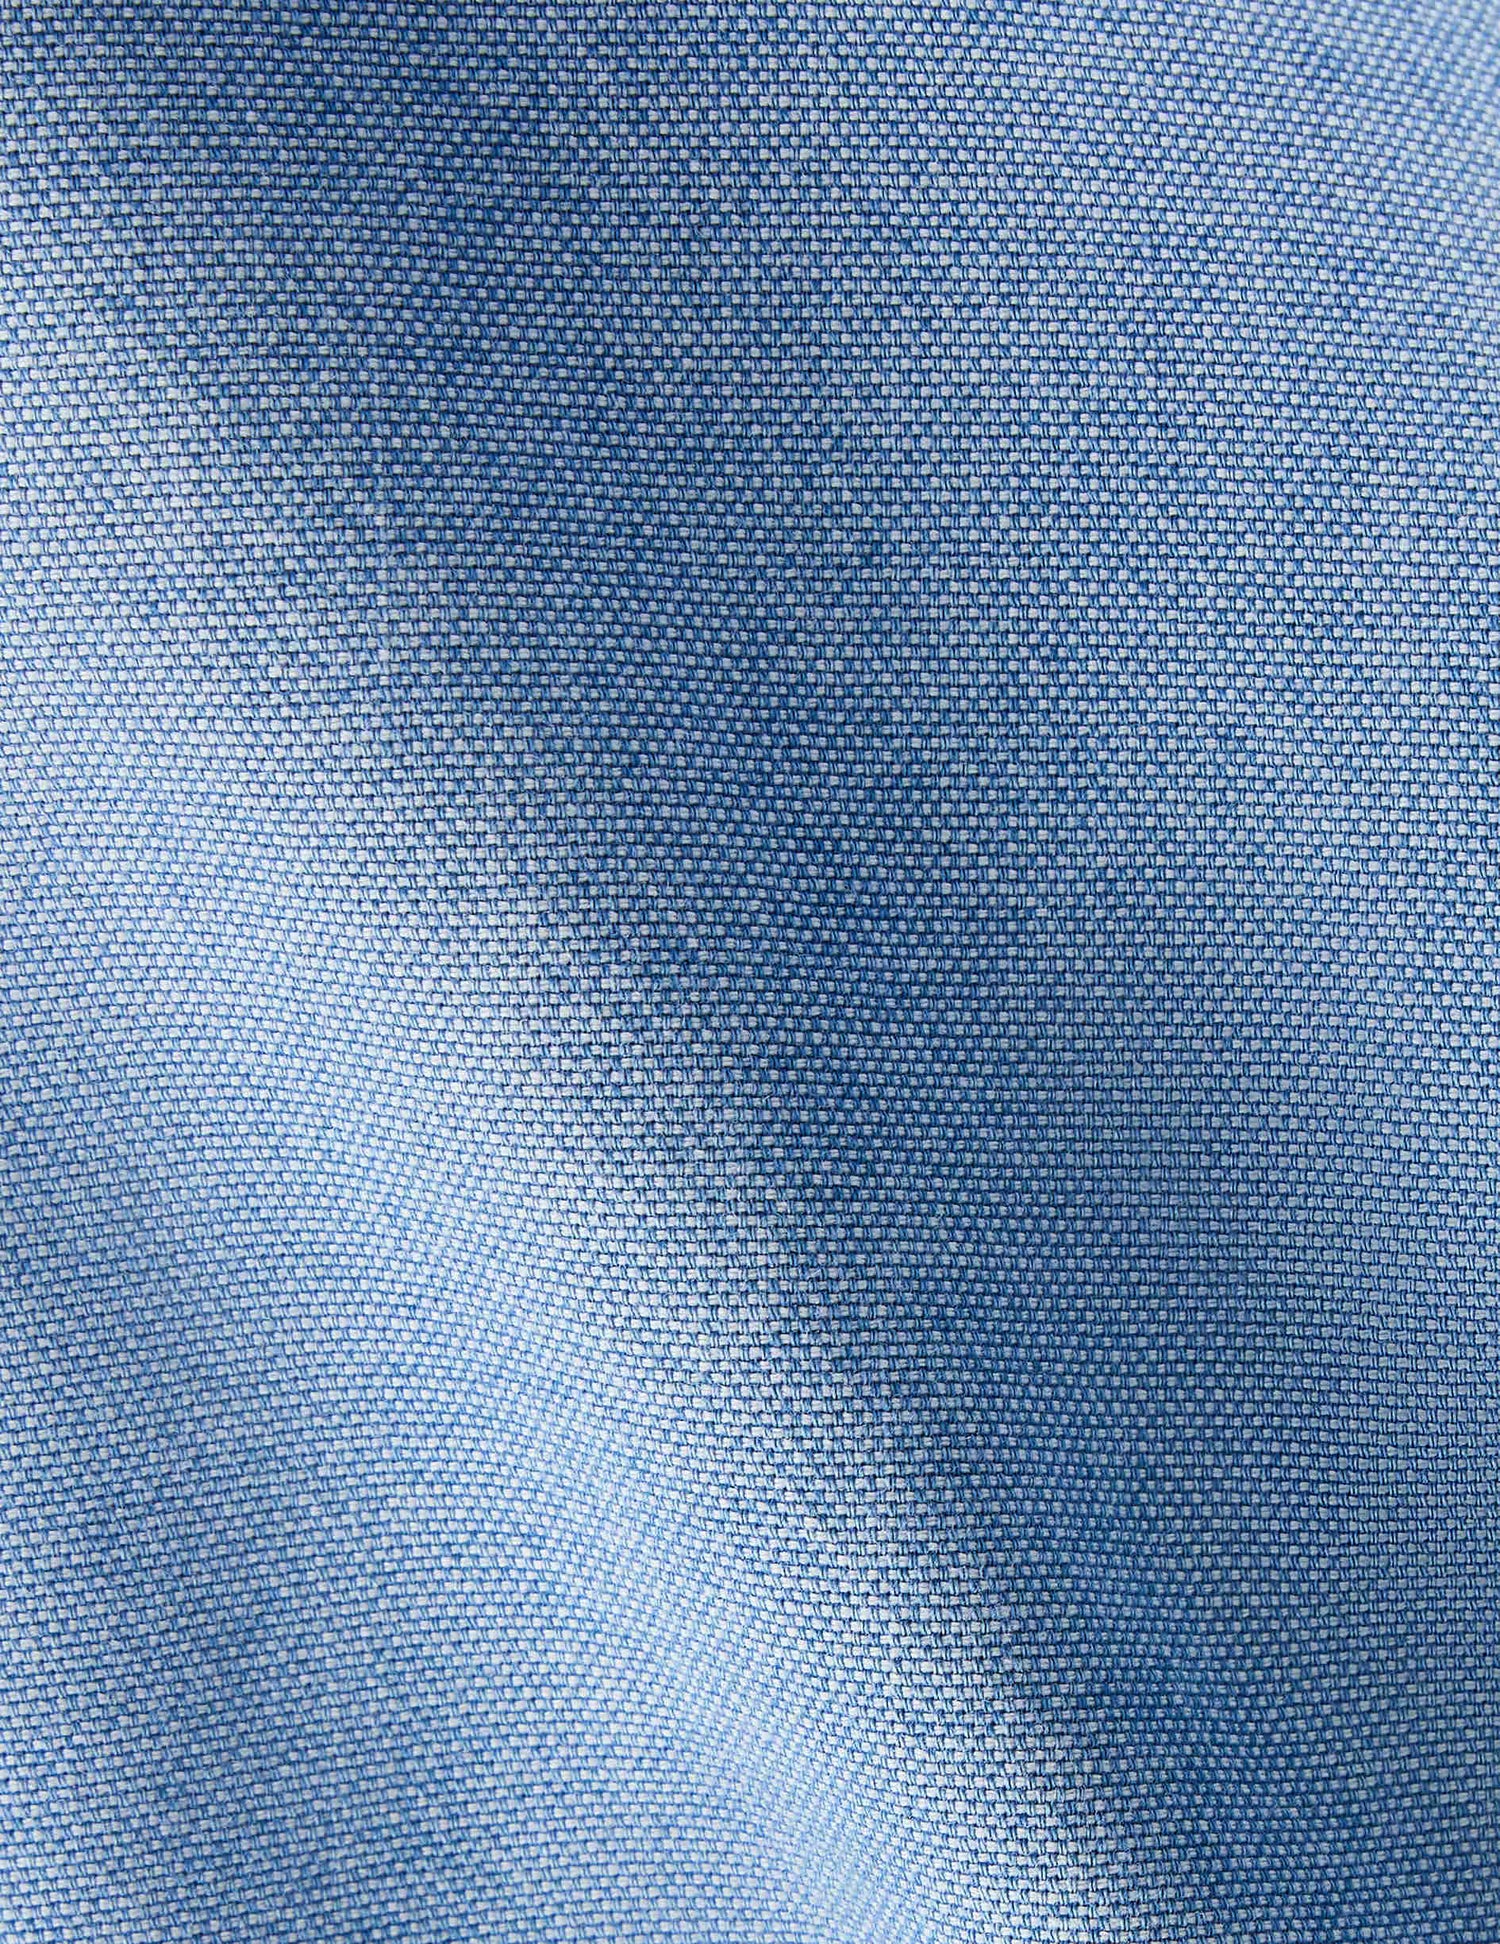 Chemise mixte "Je t'aime" bleu clair - Chambray - Col Figaret#8